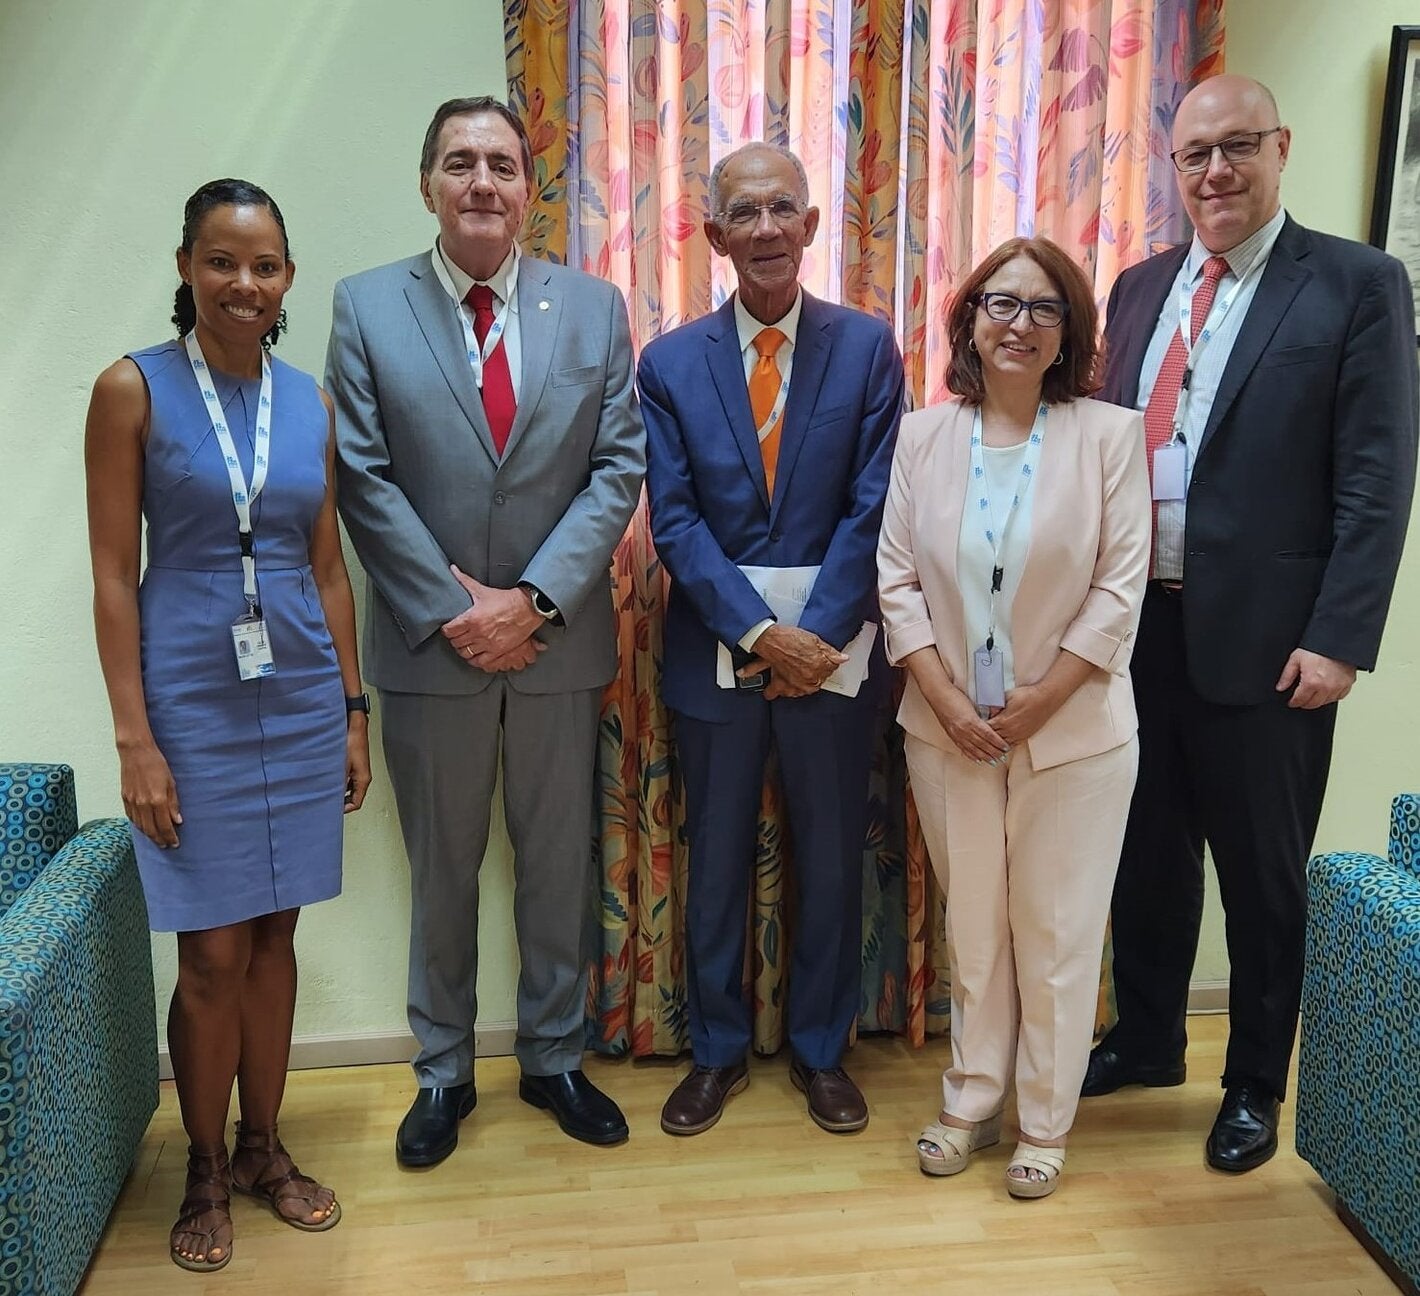 Executive Director, Healthy Caribbean Coalition, Maisha Hutton; PAHO Director, Dr Jarbas Barbosa; President of HCC, Prof. Sir Trevor Hassell; Advisor, Noncommunicable  Diseases and Mental Health, Dr Gloria Giralda and Subregional Programme Director, PAHO, Dean Chambliss.